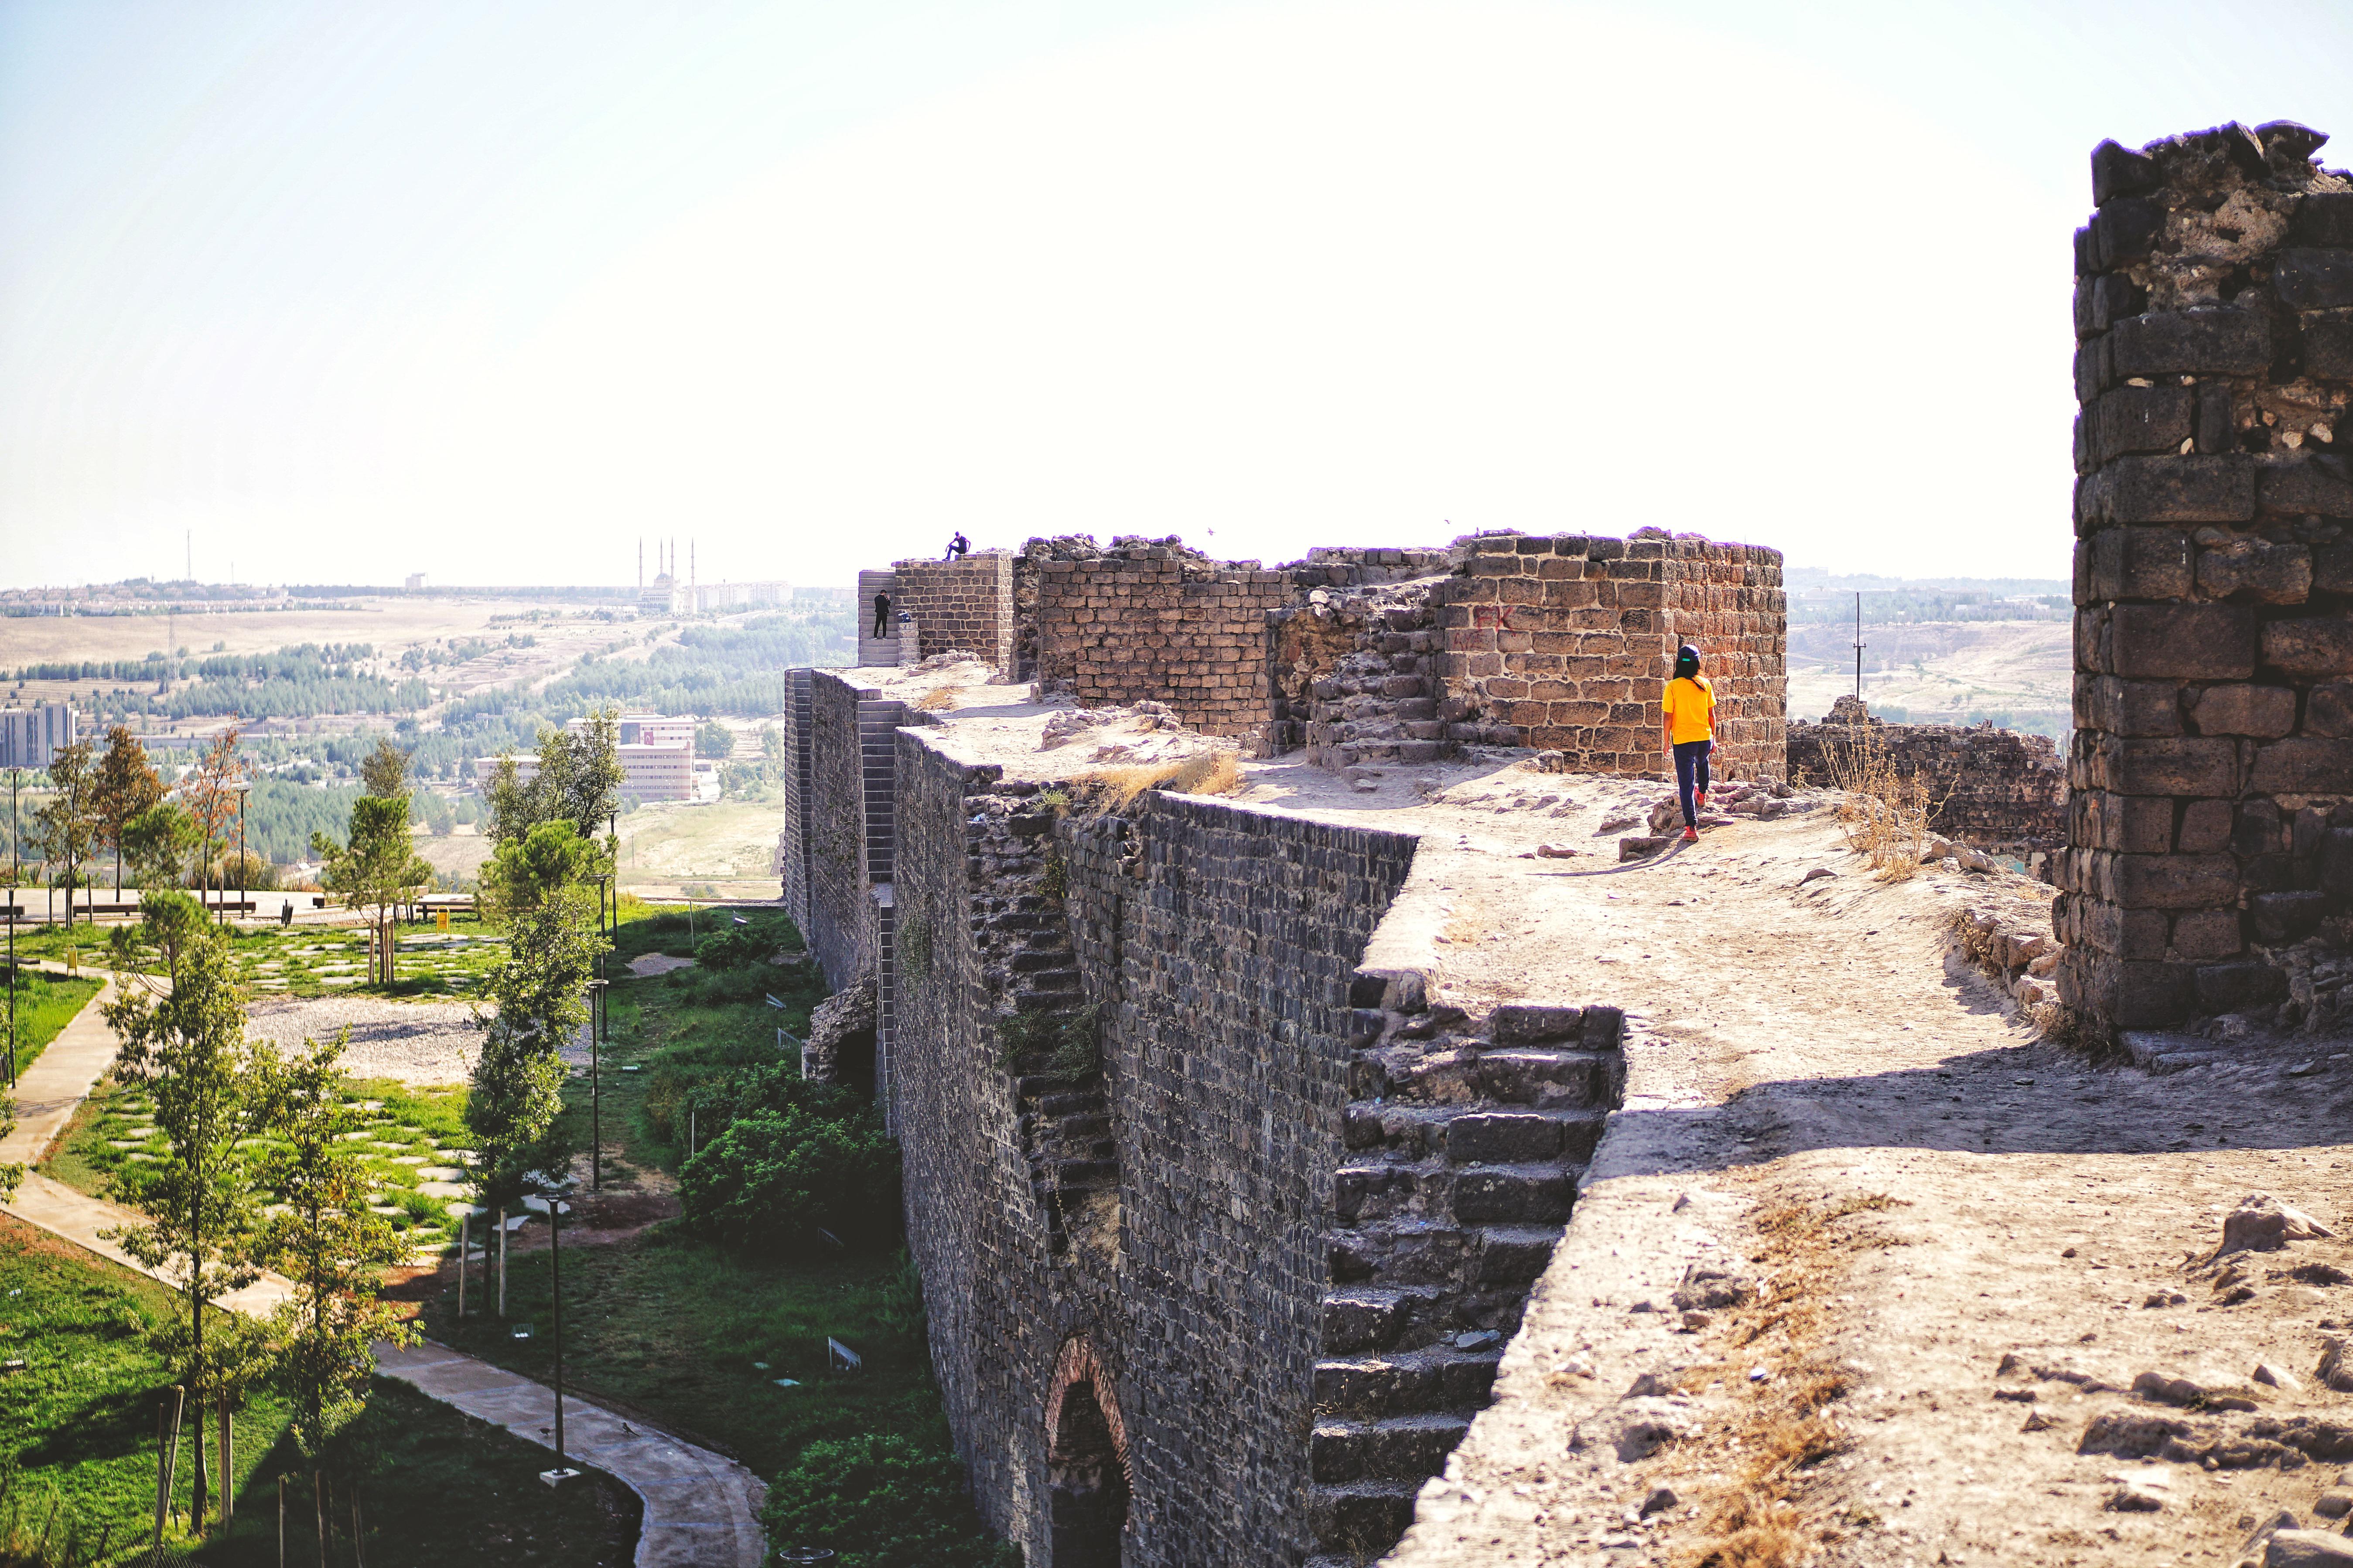 The Roman walls of Diyarbakir, a historic city in eastern Turkey. Built in the 4th century, they are nearly 6 km long and are some of the longest complete defensive walls remaining in the world.jpeg